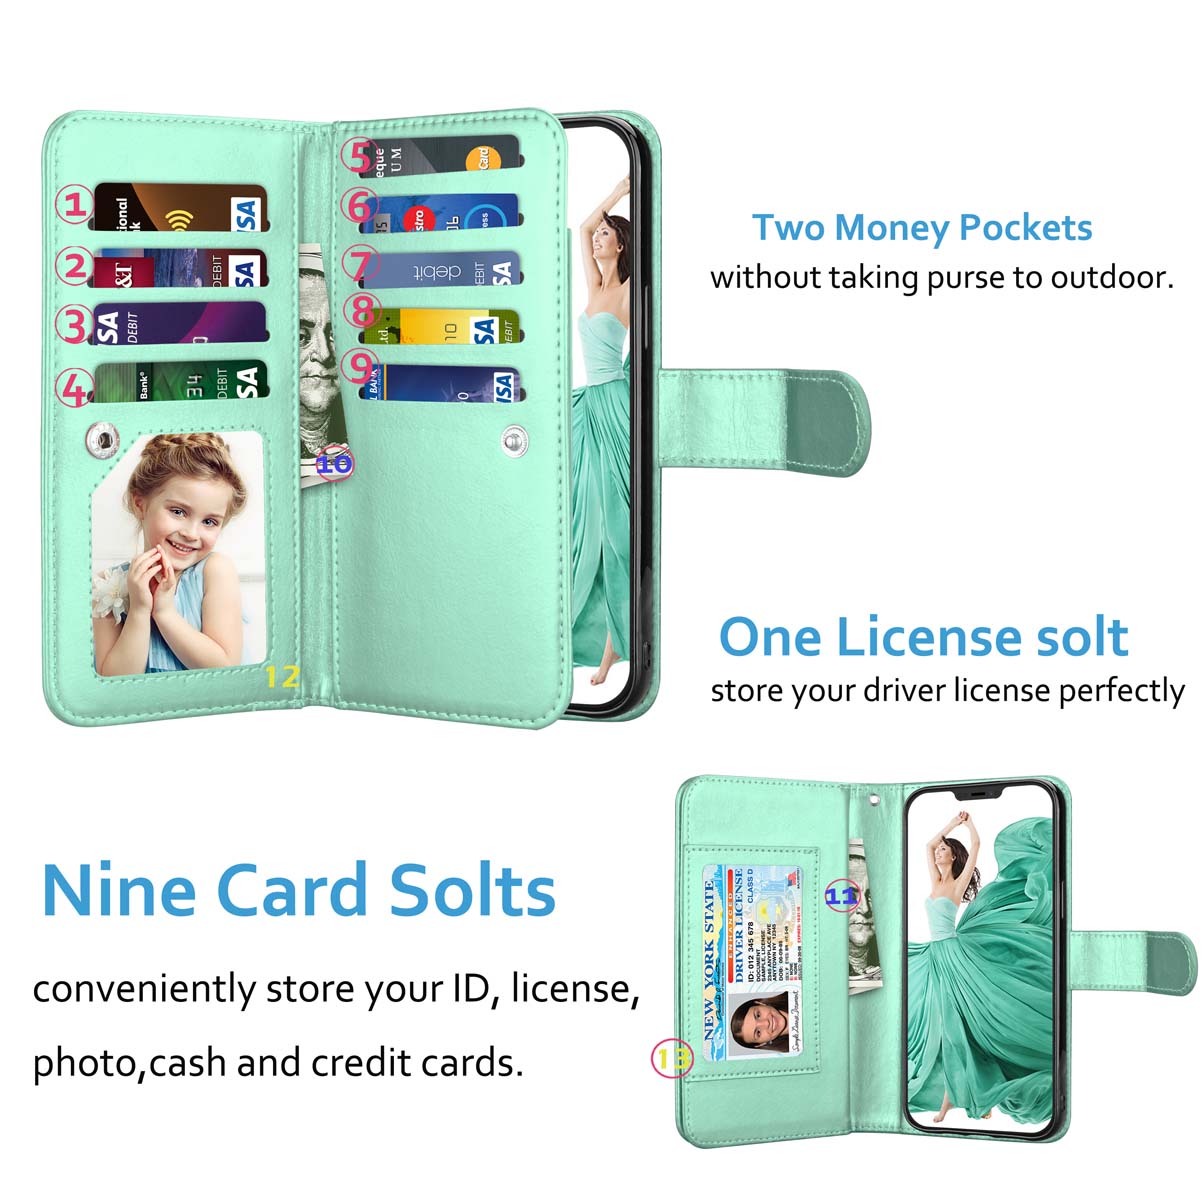 iPhone 12 Mini Case, Wallet Case iPhone 12, iPhone 12 Mini PU Leather Case, Njjex PU Leather Magnet Stand Wallet Credit Card Holder Flip Case 9 Card Slots Case for Apple iPhone 12 Mini 5.4" 2020 -Mint - image 2 of 6